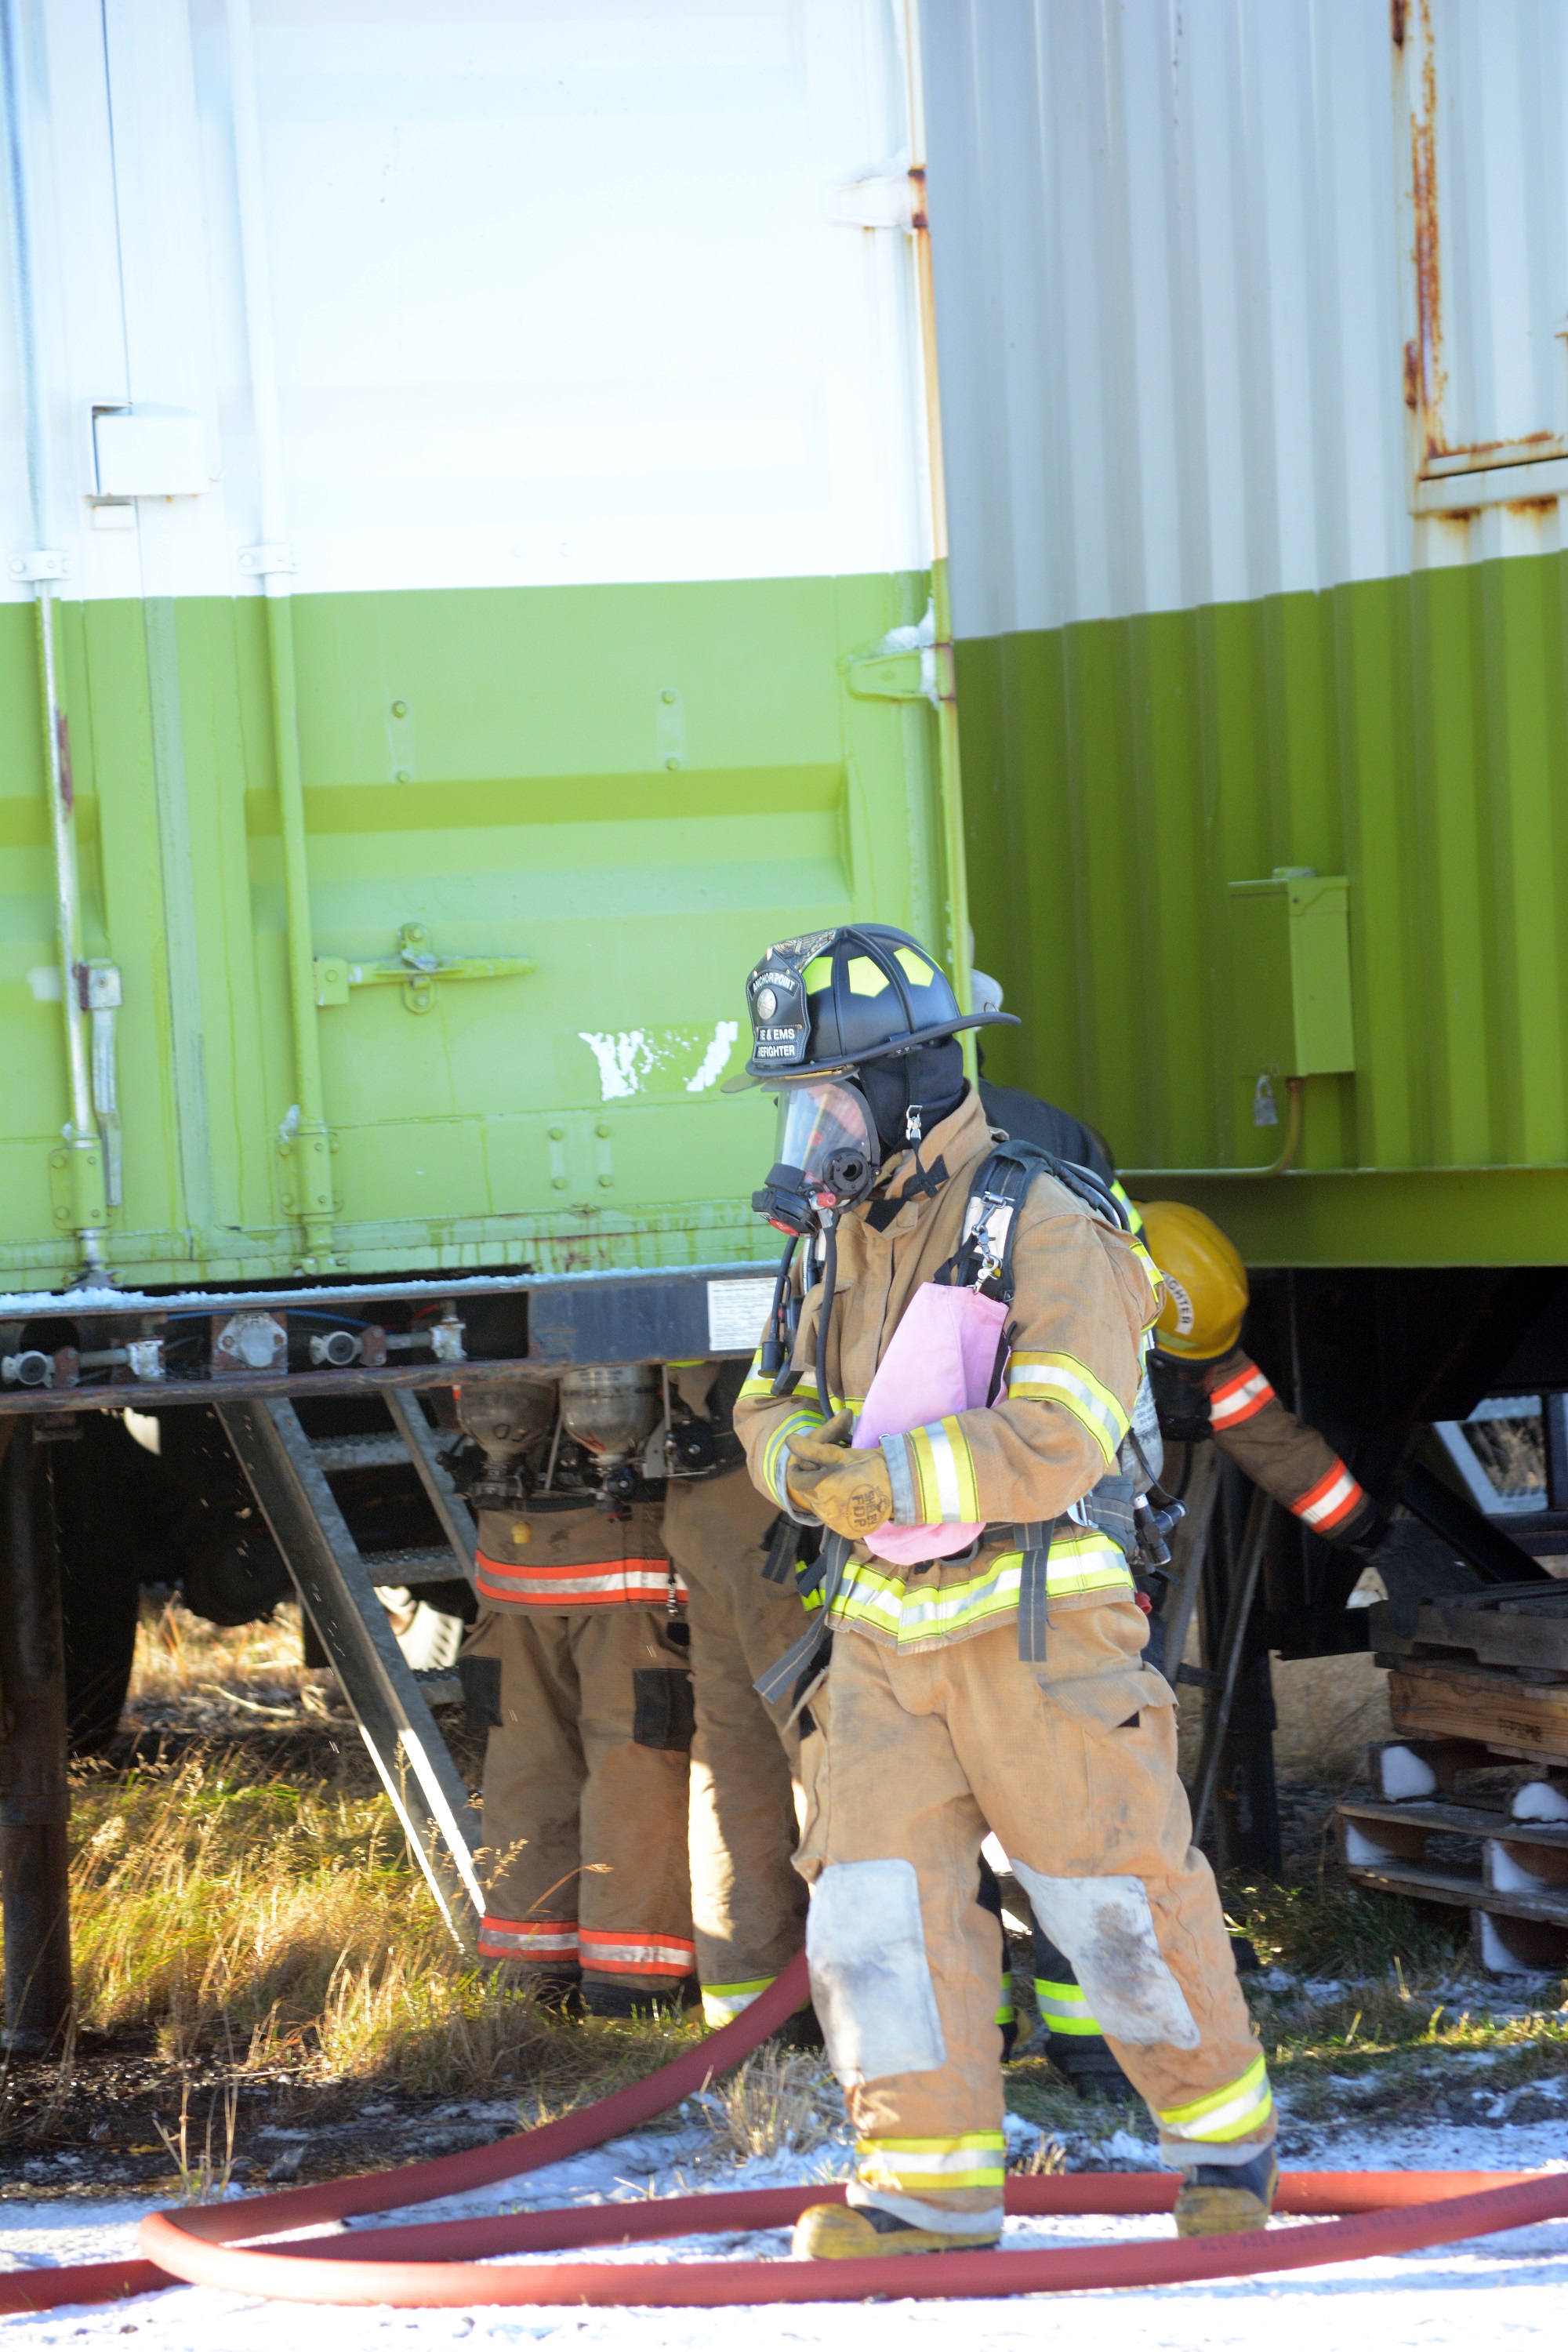 Kenai Peninsula Borough Mayor Mike Navarre attends firefighter training on Saturday at the Homer Volunteer Fire Department Training Facility on the Homer Spit.-Photo by Michael Armstrong, Homer News